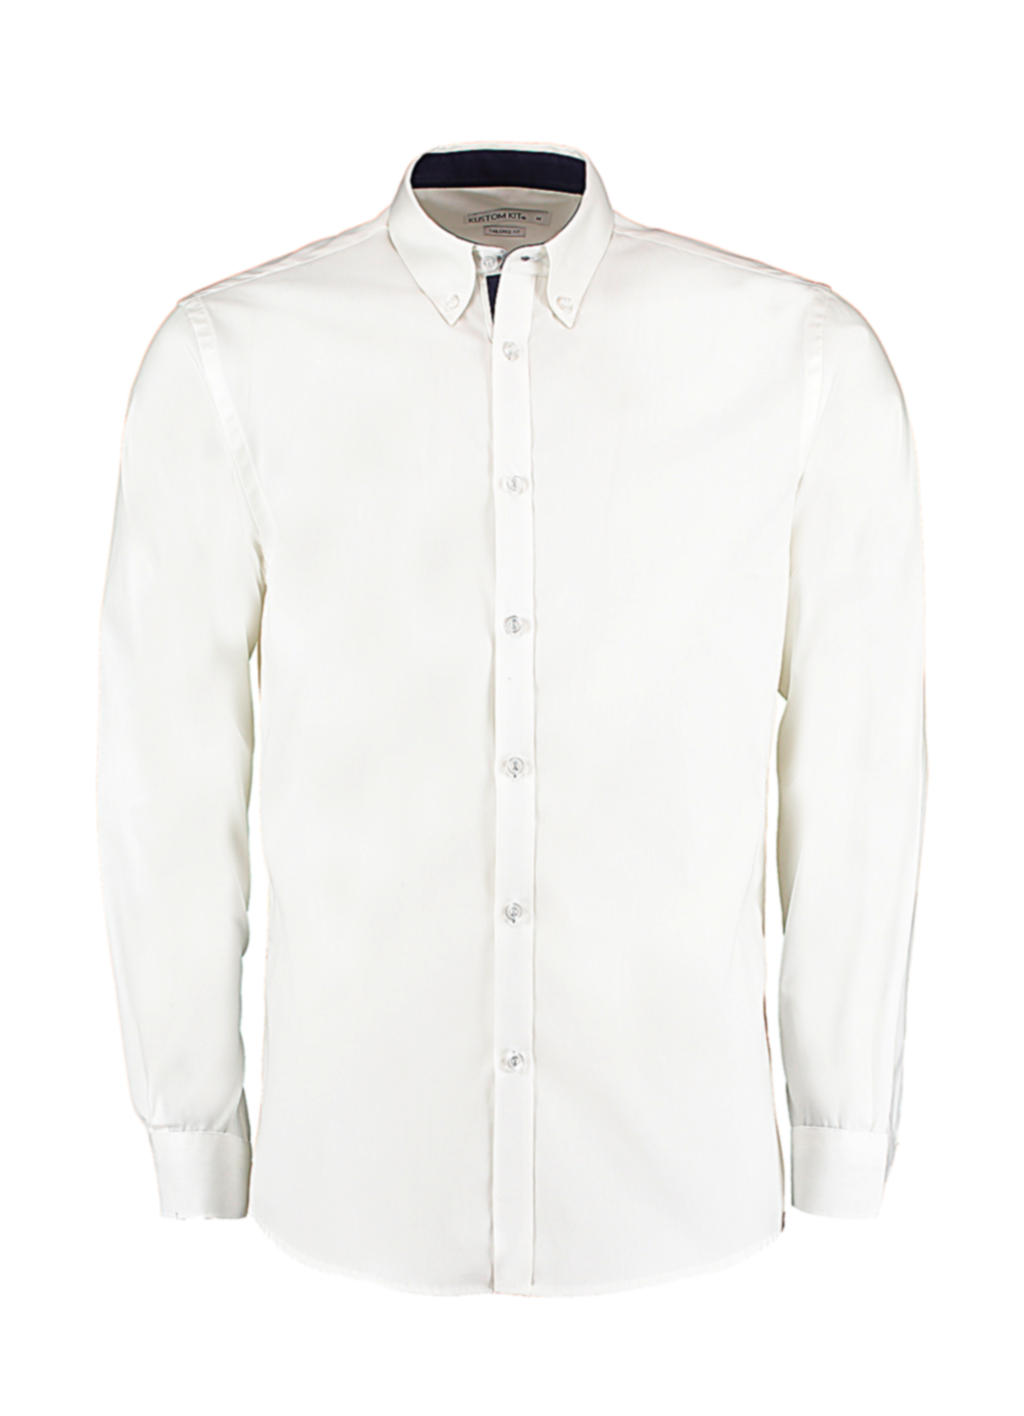  Tailored Fit Premium Contrast Oxford Shirt in Farbe White/Navy